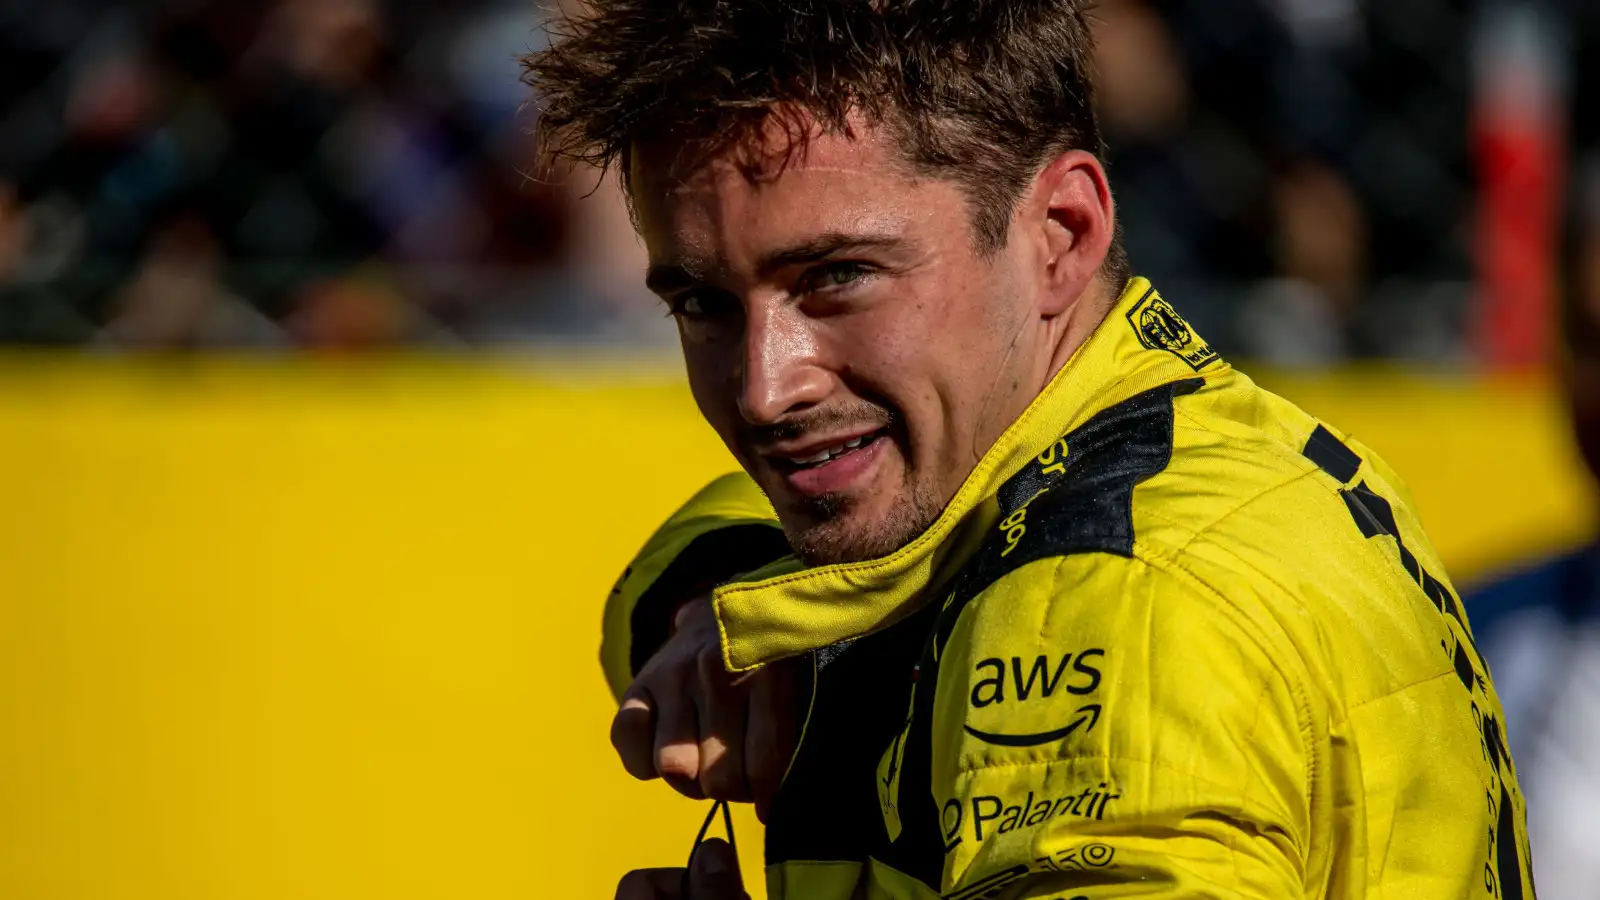 Charles Leclerc grinning after taking pole position. Italy September 2022